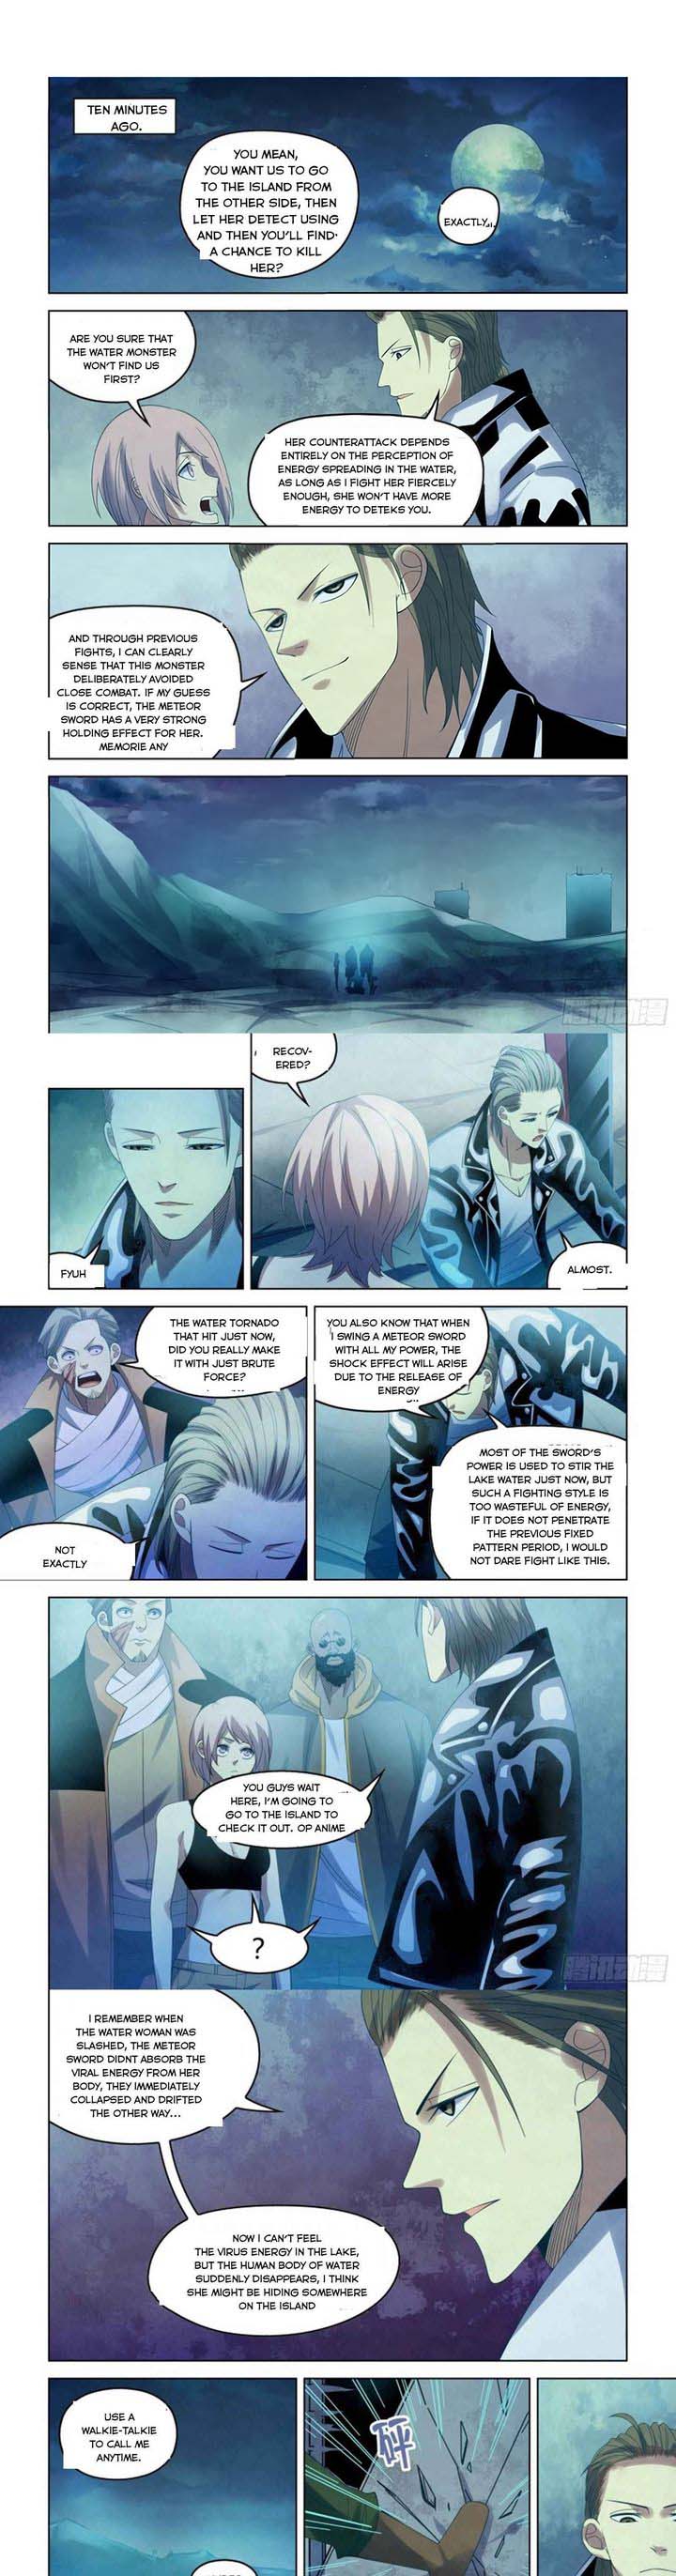 The Last Human Chapter 344 Page 1